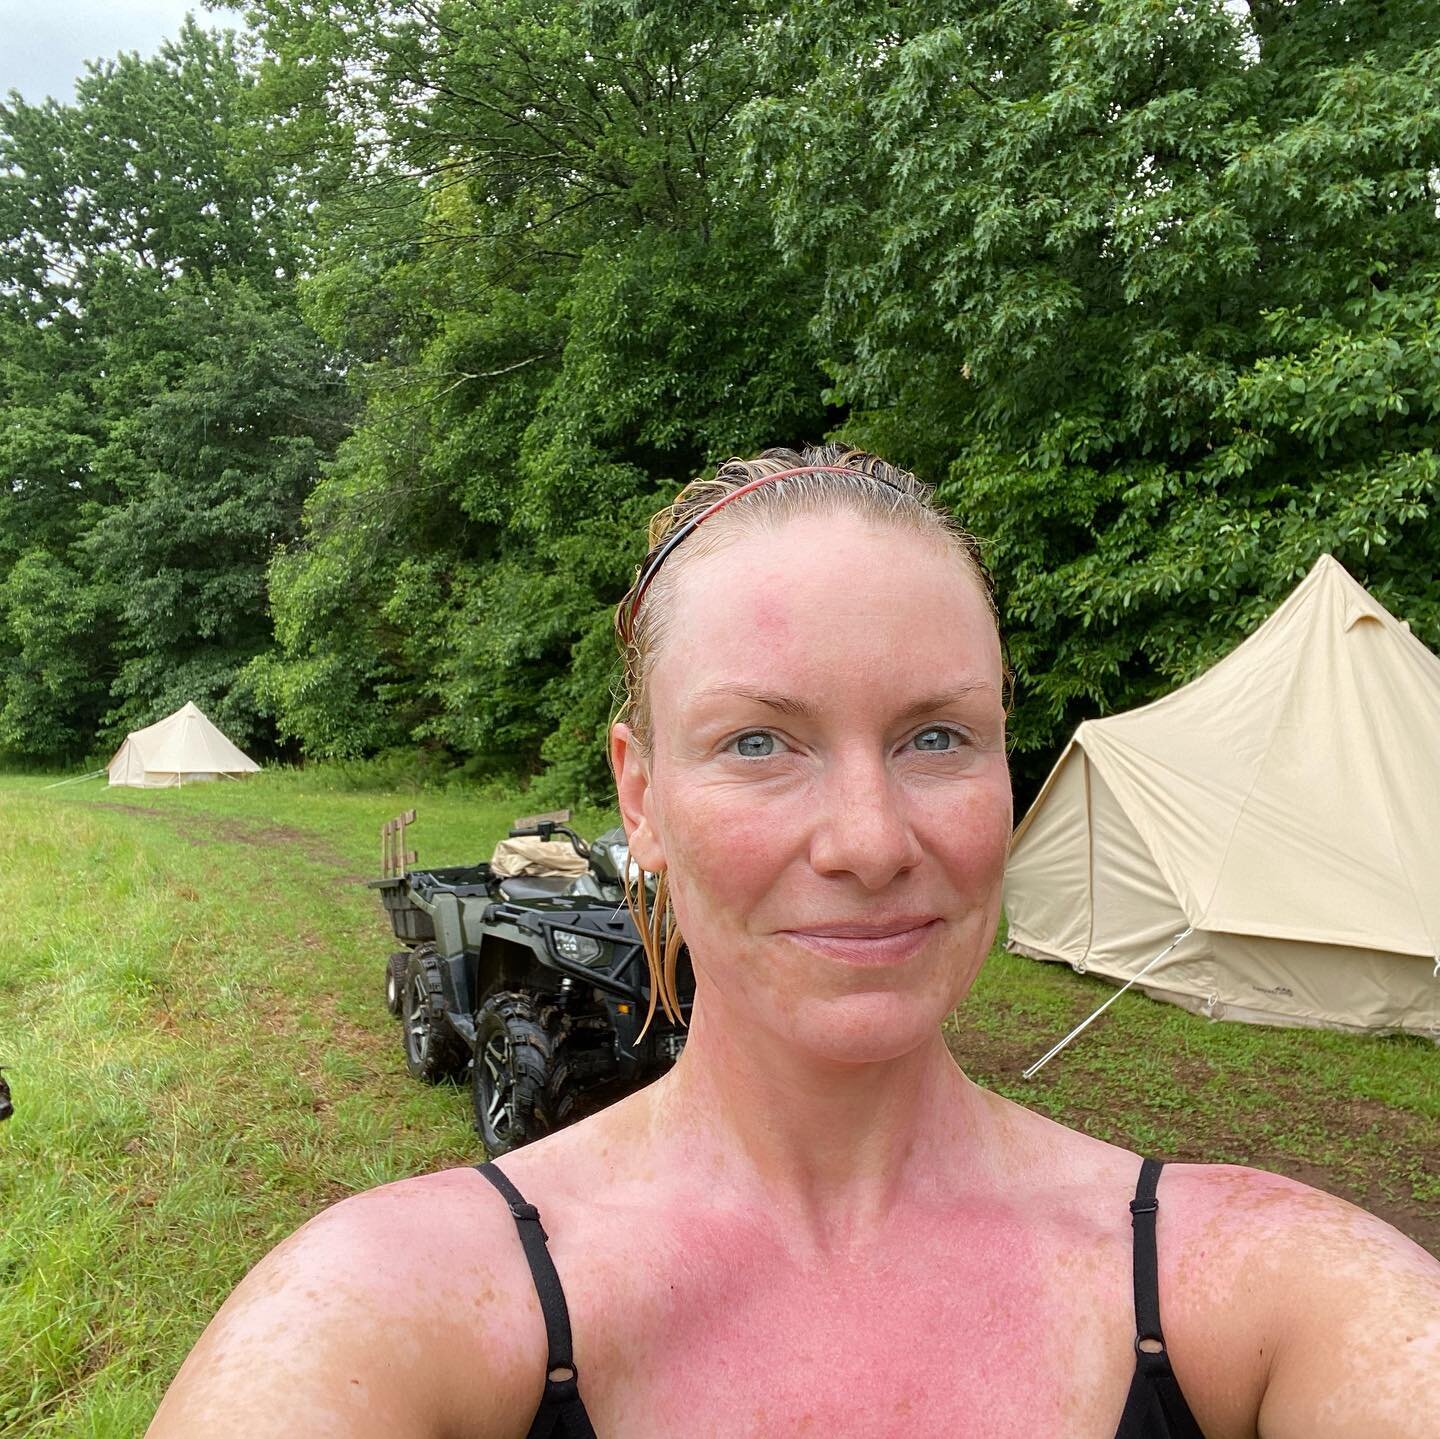 The less #glamorous  side of #glamping. Setting up in the #rain. #soaked but it&rsquo;s nice and dry and #glampstars #cozy inside for the guests.  #blissfield #july4th